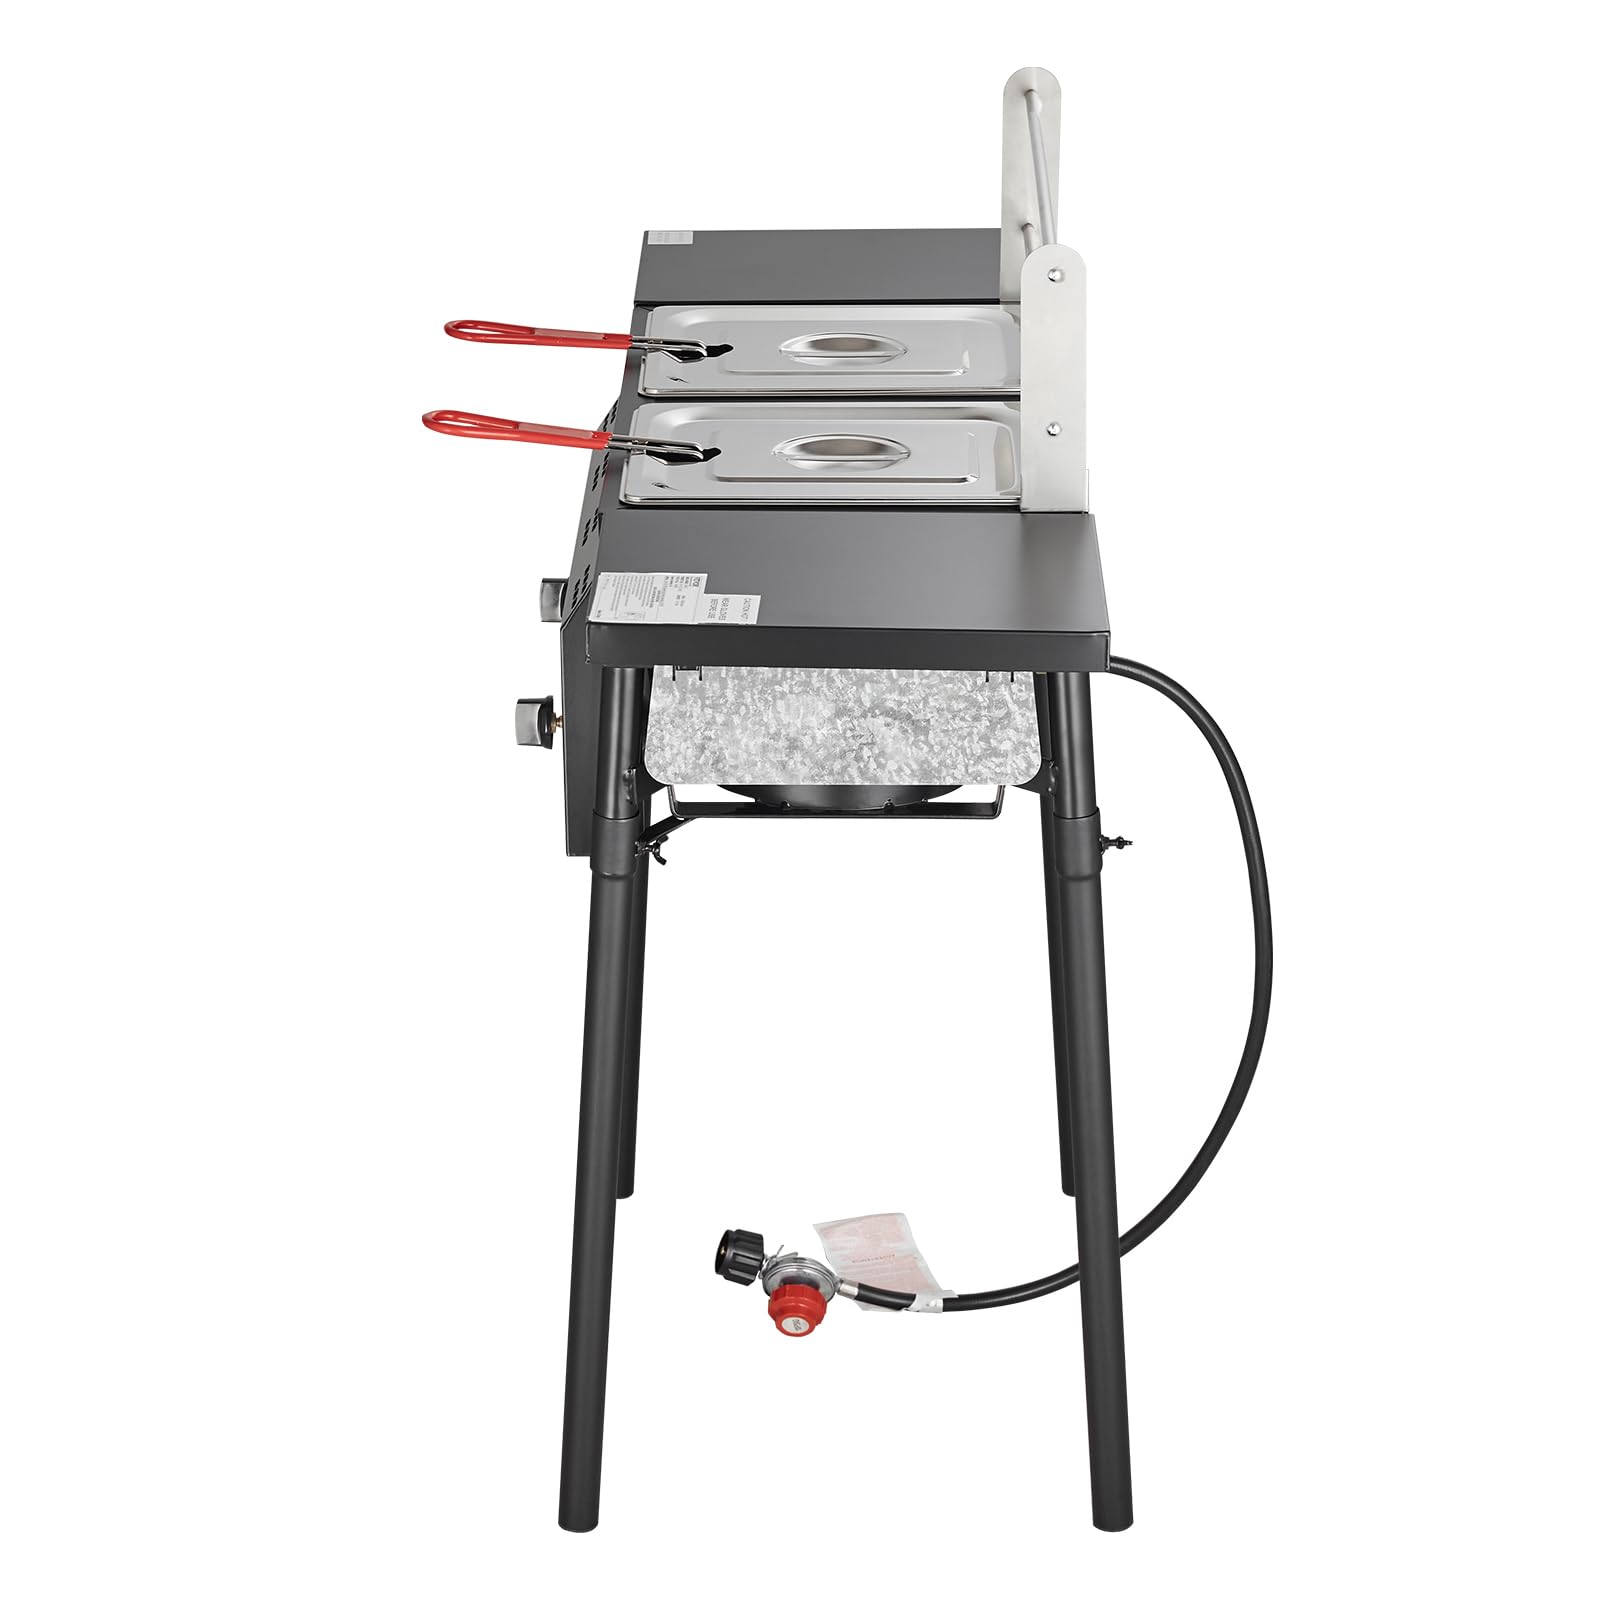 VEVOR Outdoor Propane Deep Fryer, Double Burners Commercial Fryer, 16 Qt Stainless Steel Cooker with Removable Baskets & Lids & Tanks, Oil Fryer Cart with Thermometer & Regulator, For Outdoor Cooking